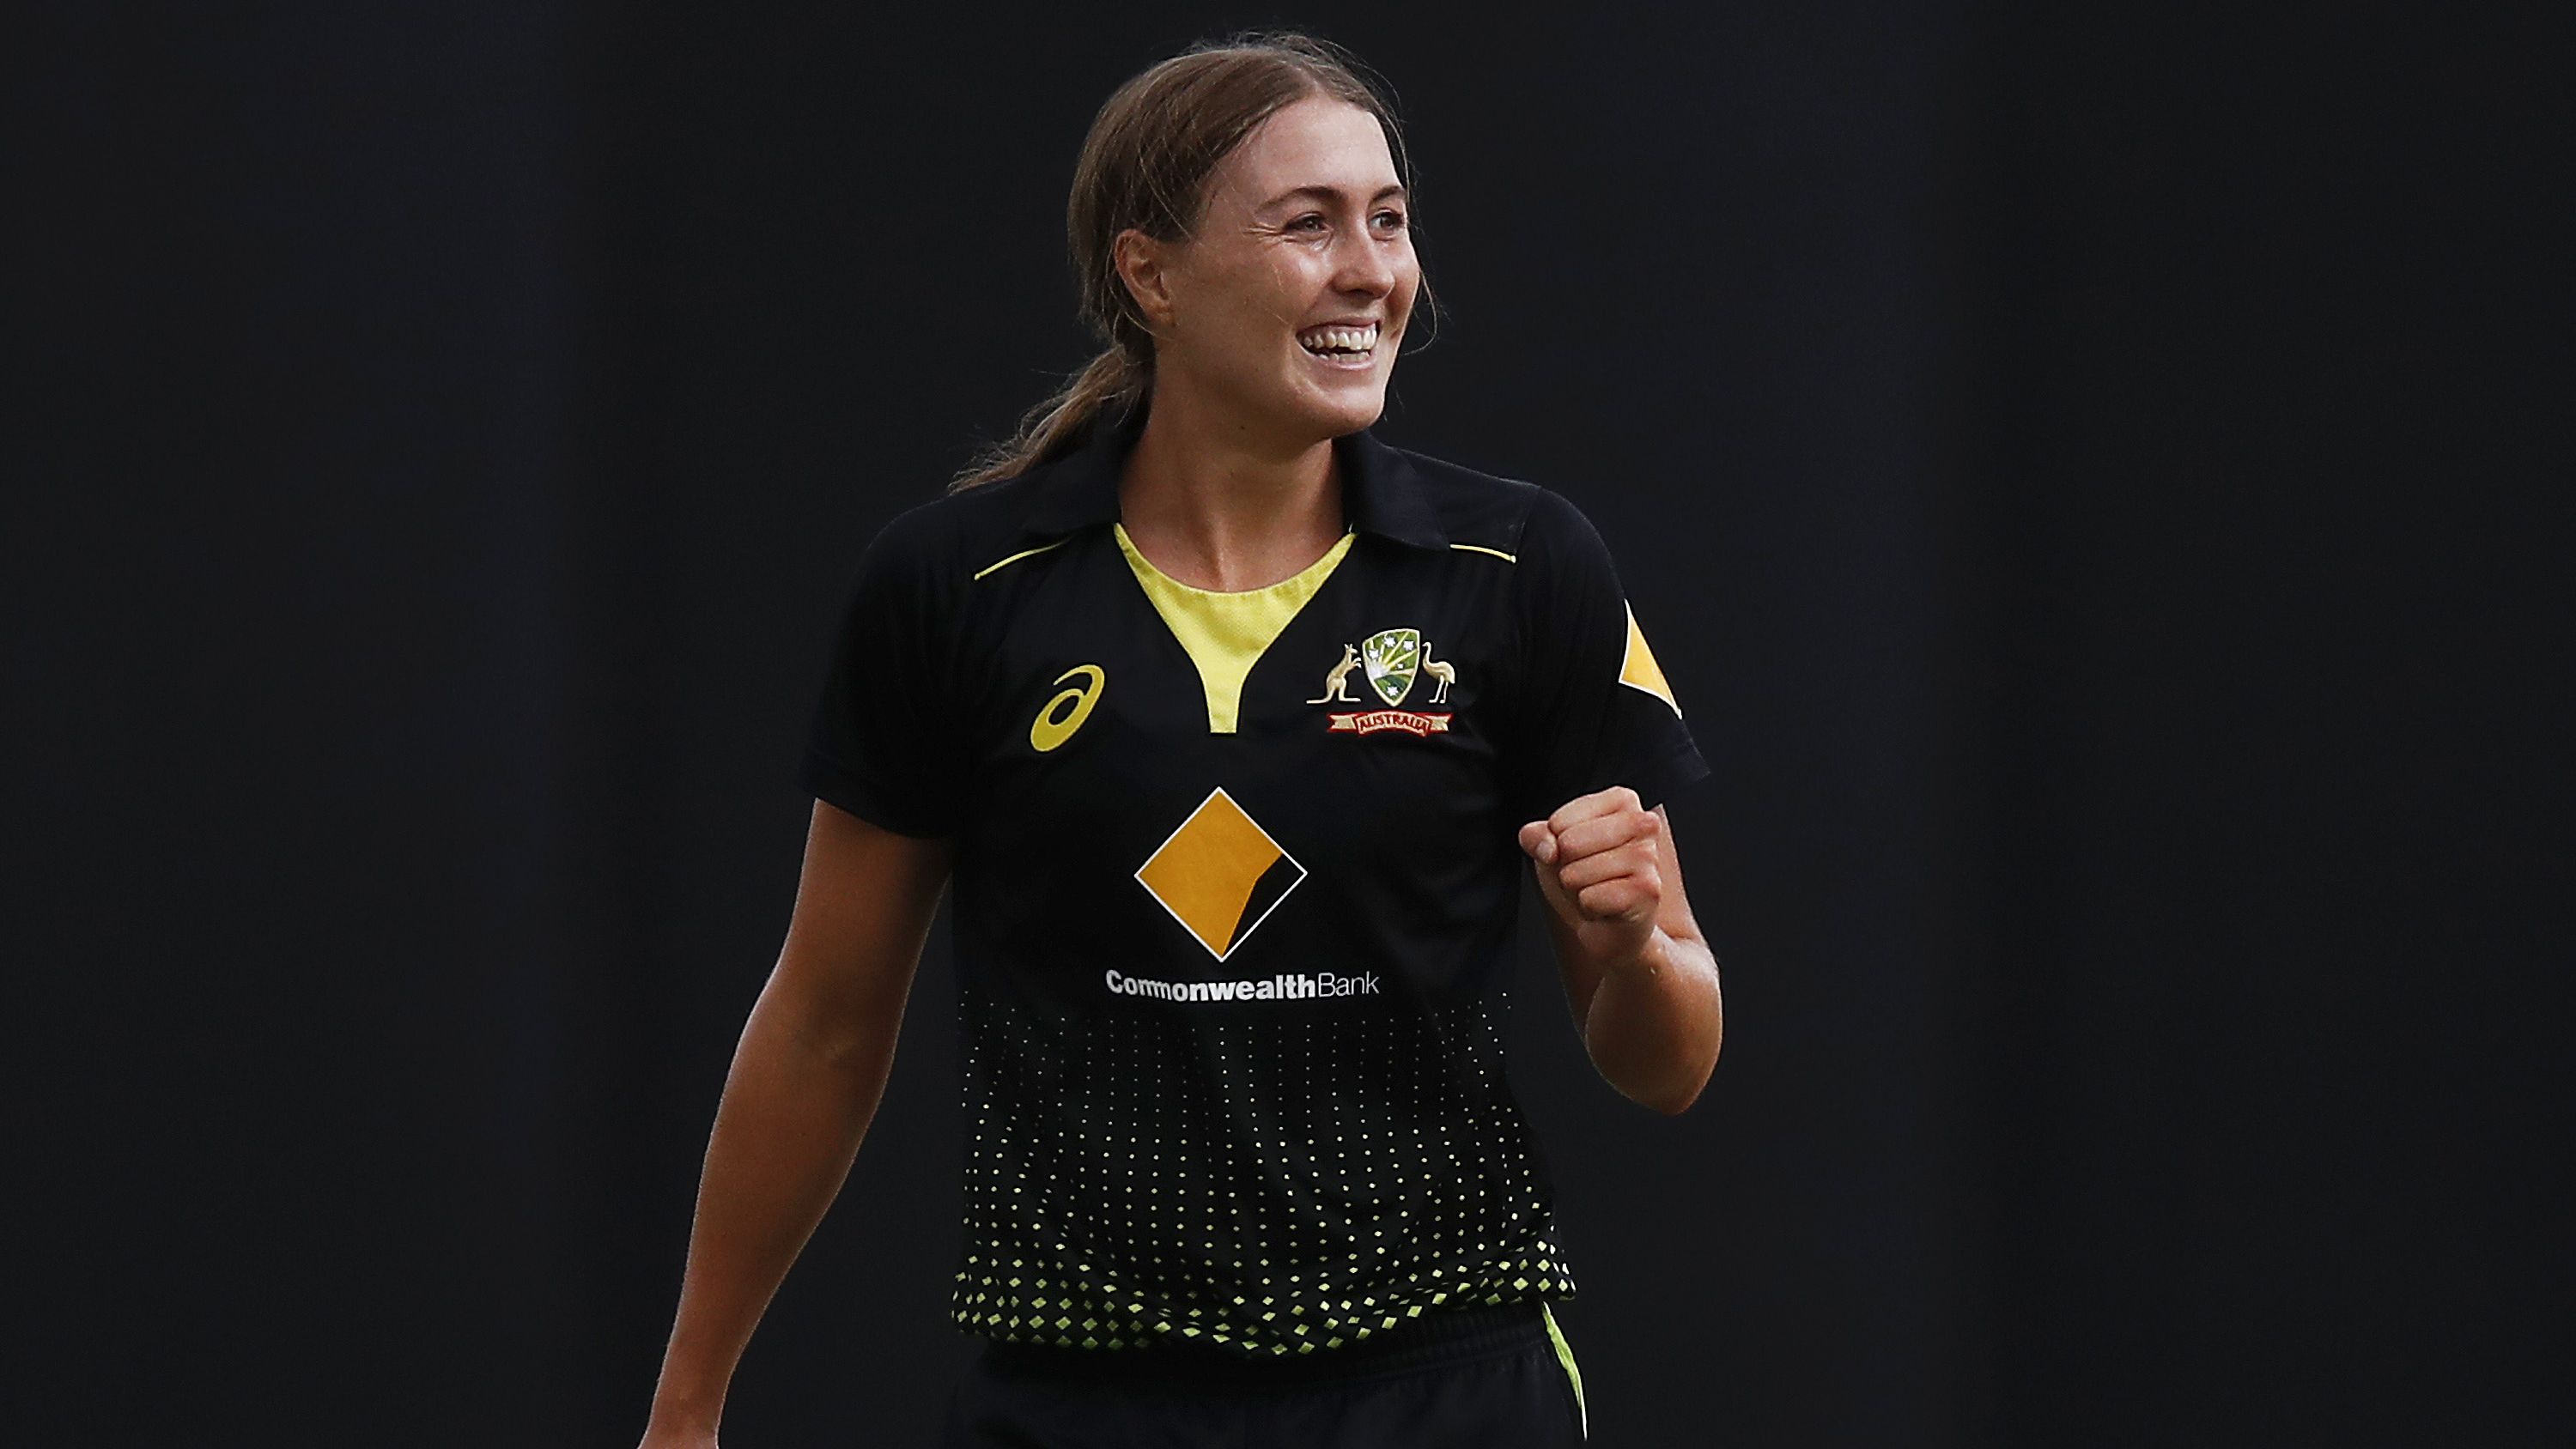 EXCLUSIVE: Tayla Vlaeminck shares the special meaning behind playing a Test match for Australia